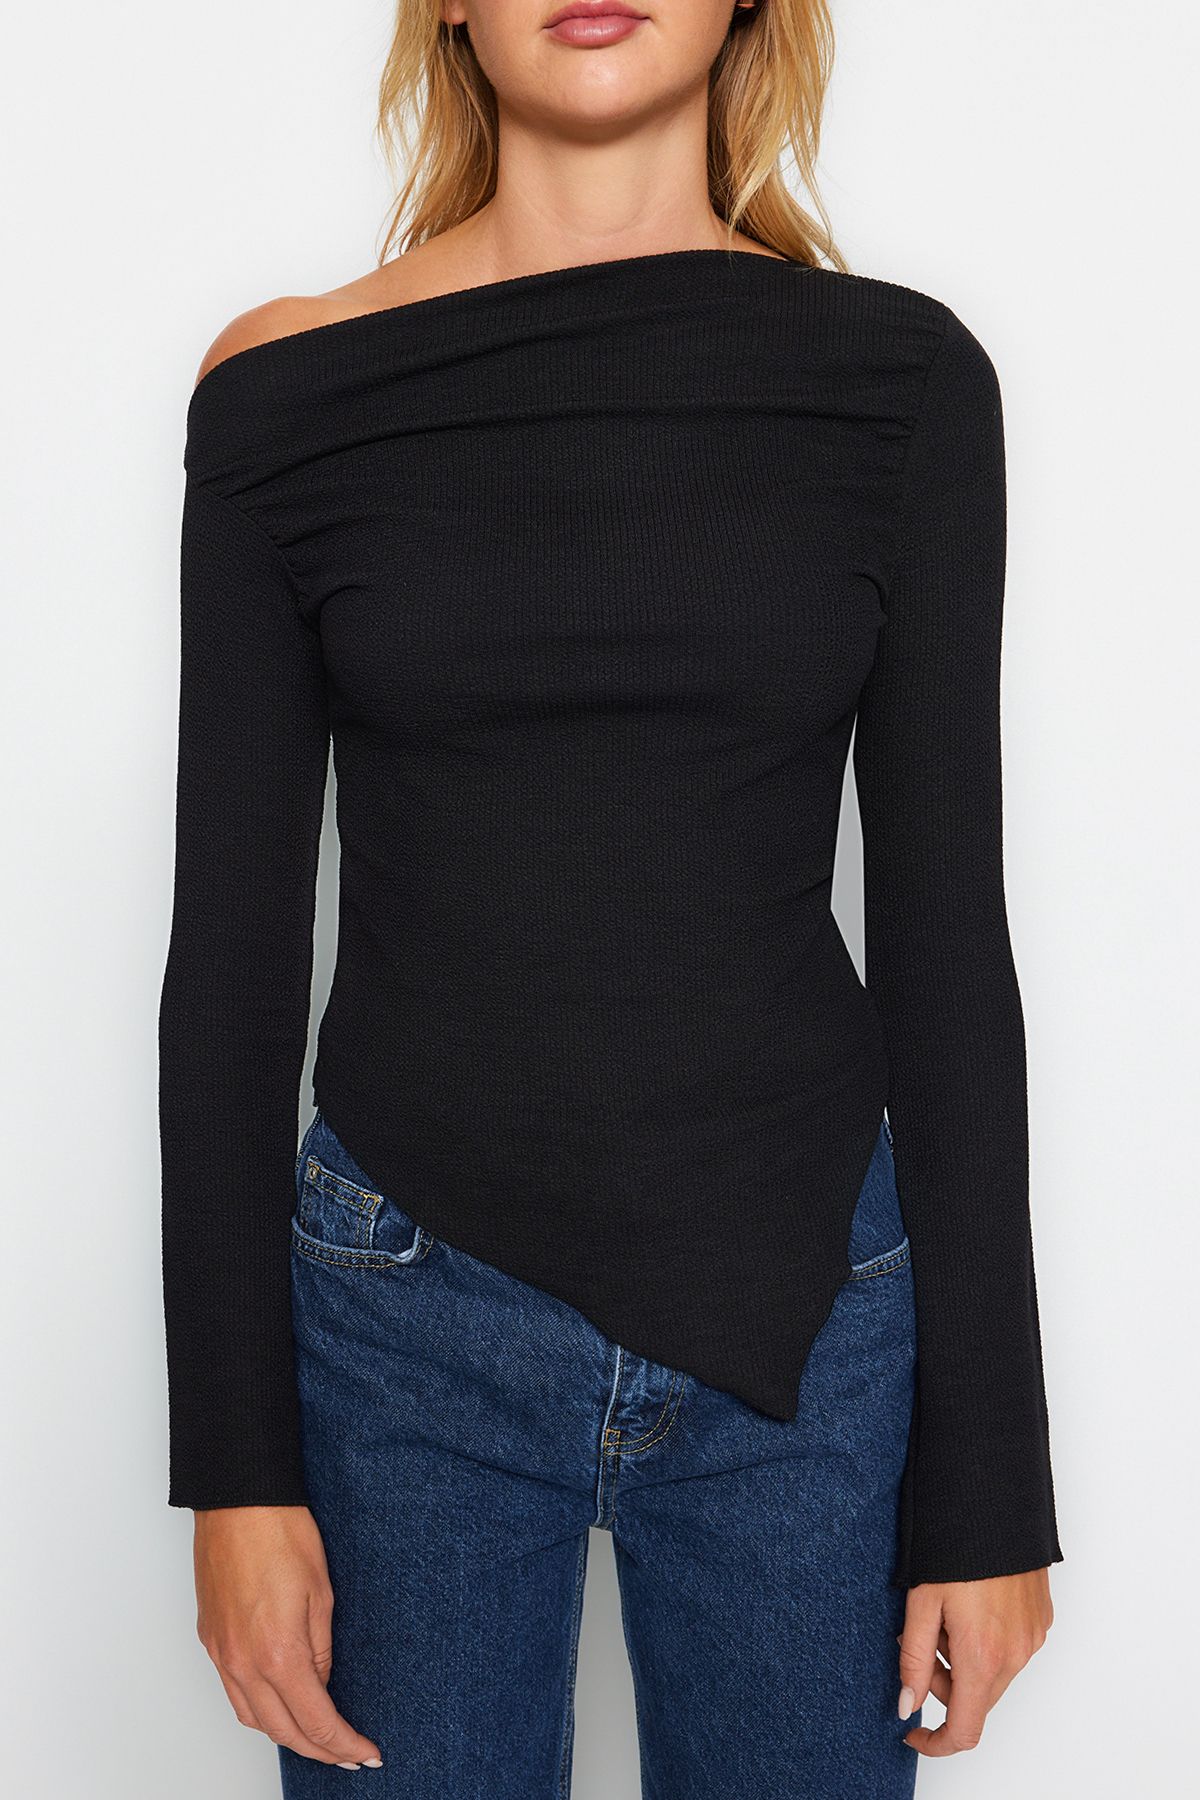 Dropship Black Open Back Blouse; Beaded Strap Asymmetric Boat Neck Top;  Elegant Casual Tops For All Occasions to Sell Online at a Lower Price